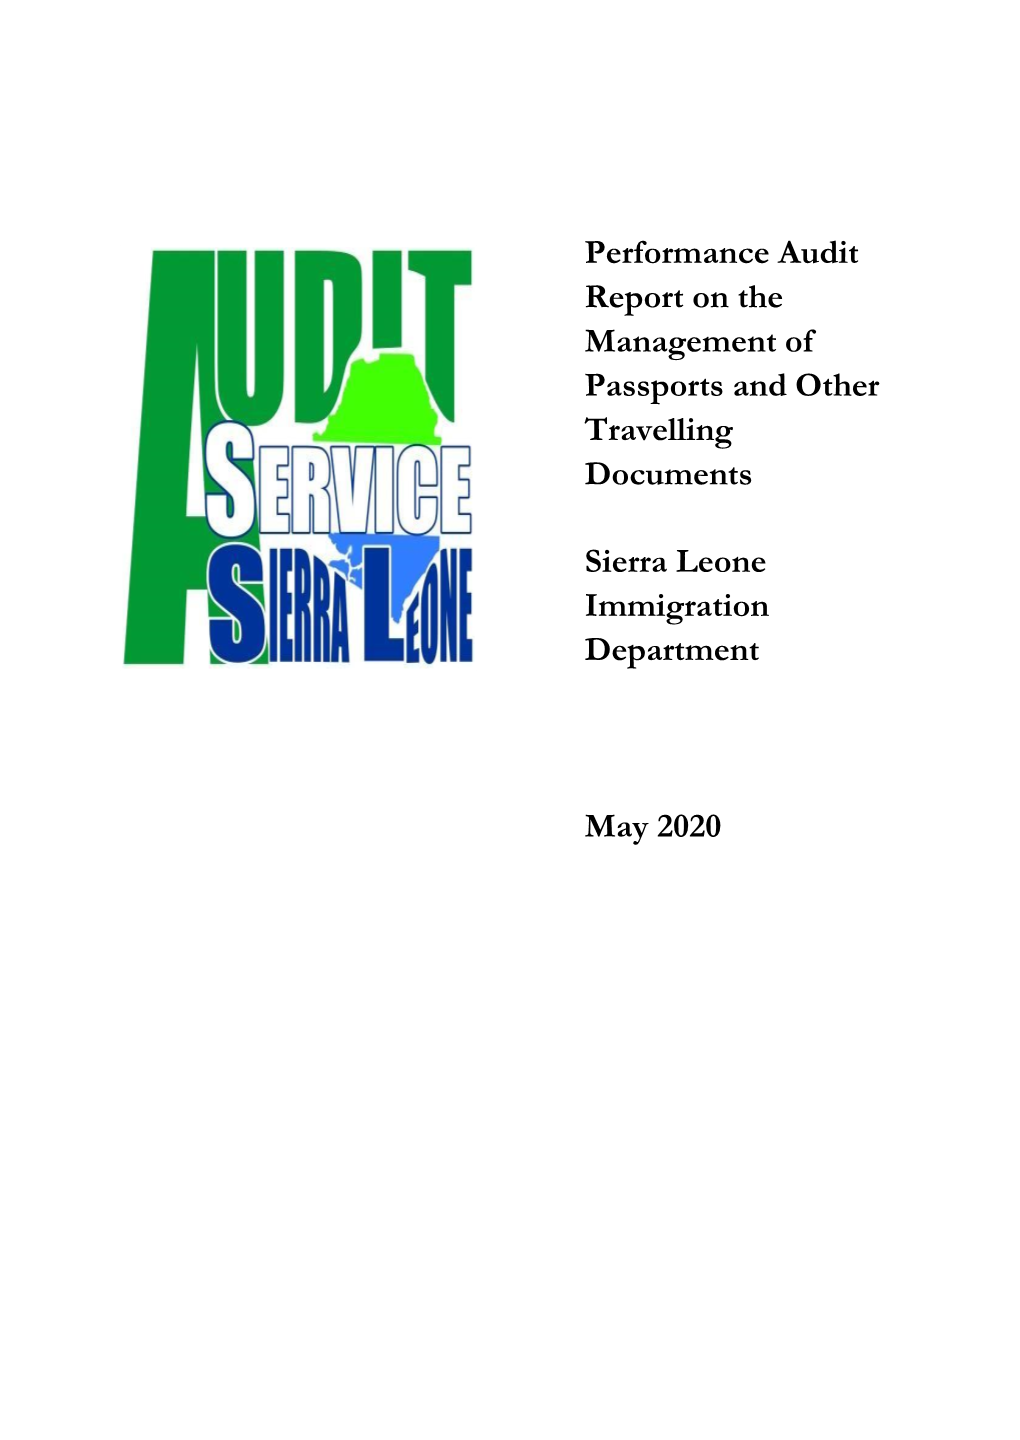 Performance Audit Report on Management of Passports